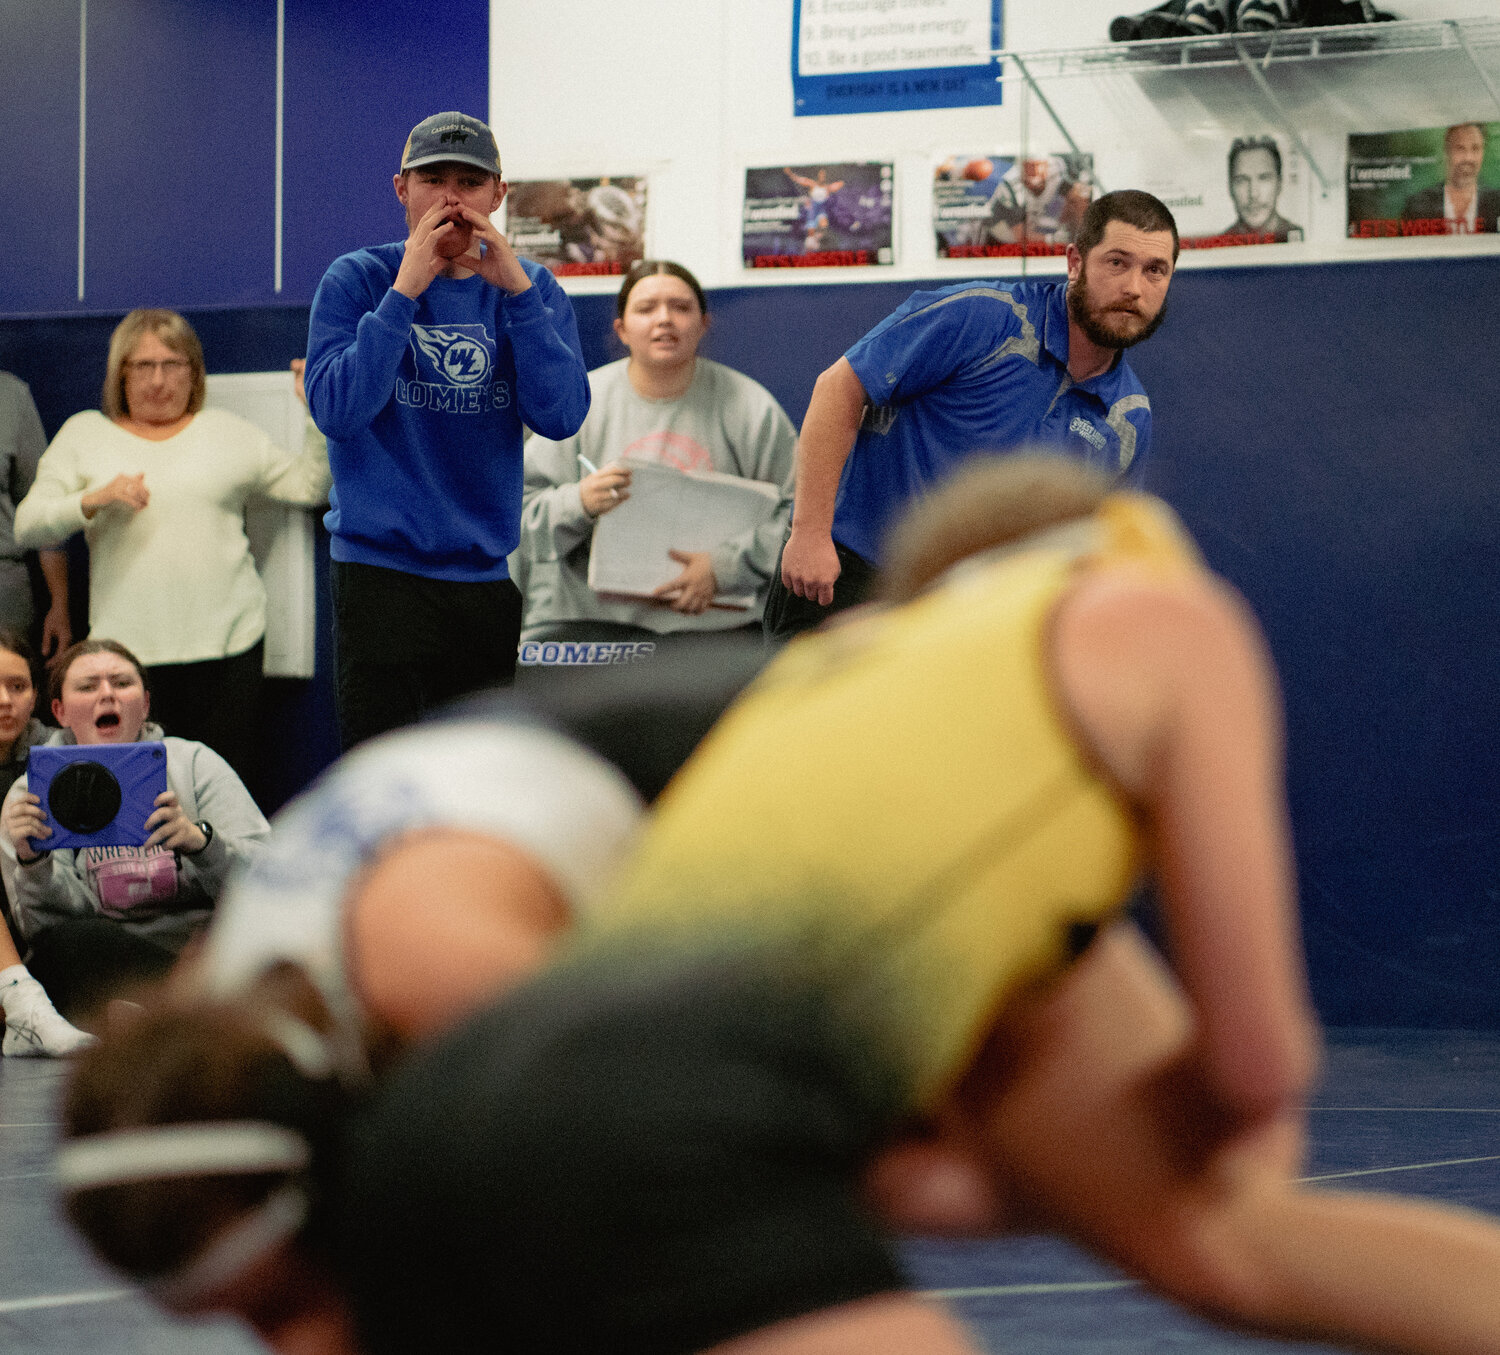 Coaches Colin Cassady (left) and Dillon Christensen look on from the coaches' corner in at Mat 3 in the Comets' wrestling room.